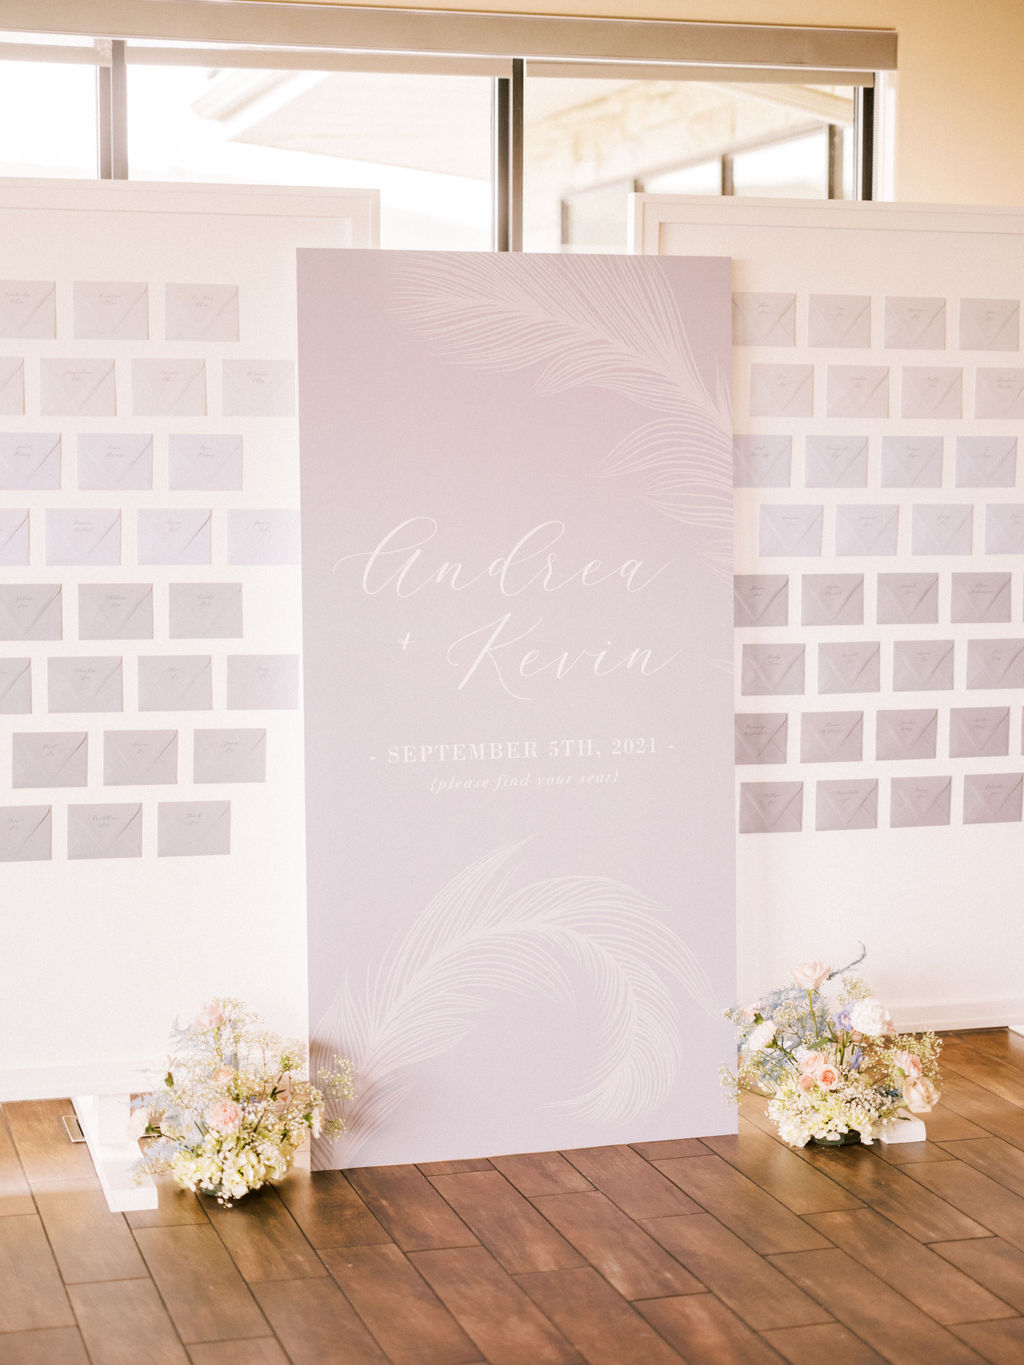 How to create a wedding seating chart, pastel wedding at sirroco golf club, pastel wedding, pastels, pretty wedding, pastel arch, big wedding arch, floral ceremony arch, ceremony arch, big ceremony arch, baby blue pink wedding, baby's breath arch, baby's breath wedding, tea ceremony, wedding photos arch, nicole sarah, the social page, navy blue bridesmaid dresses, navy blue dresses, vibrant wedding decor, bright summer wedding